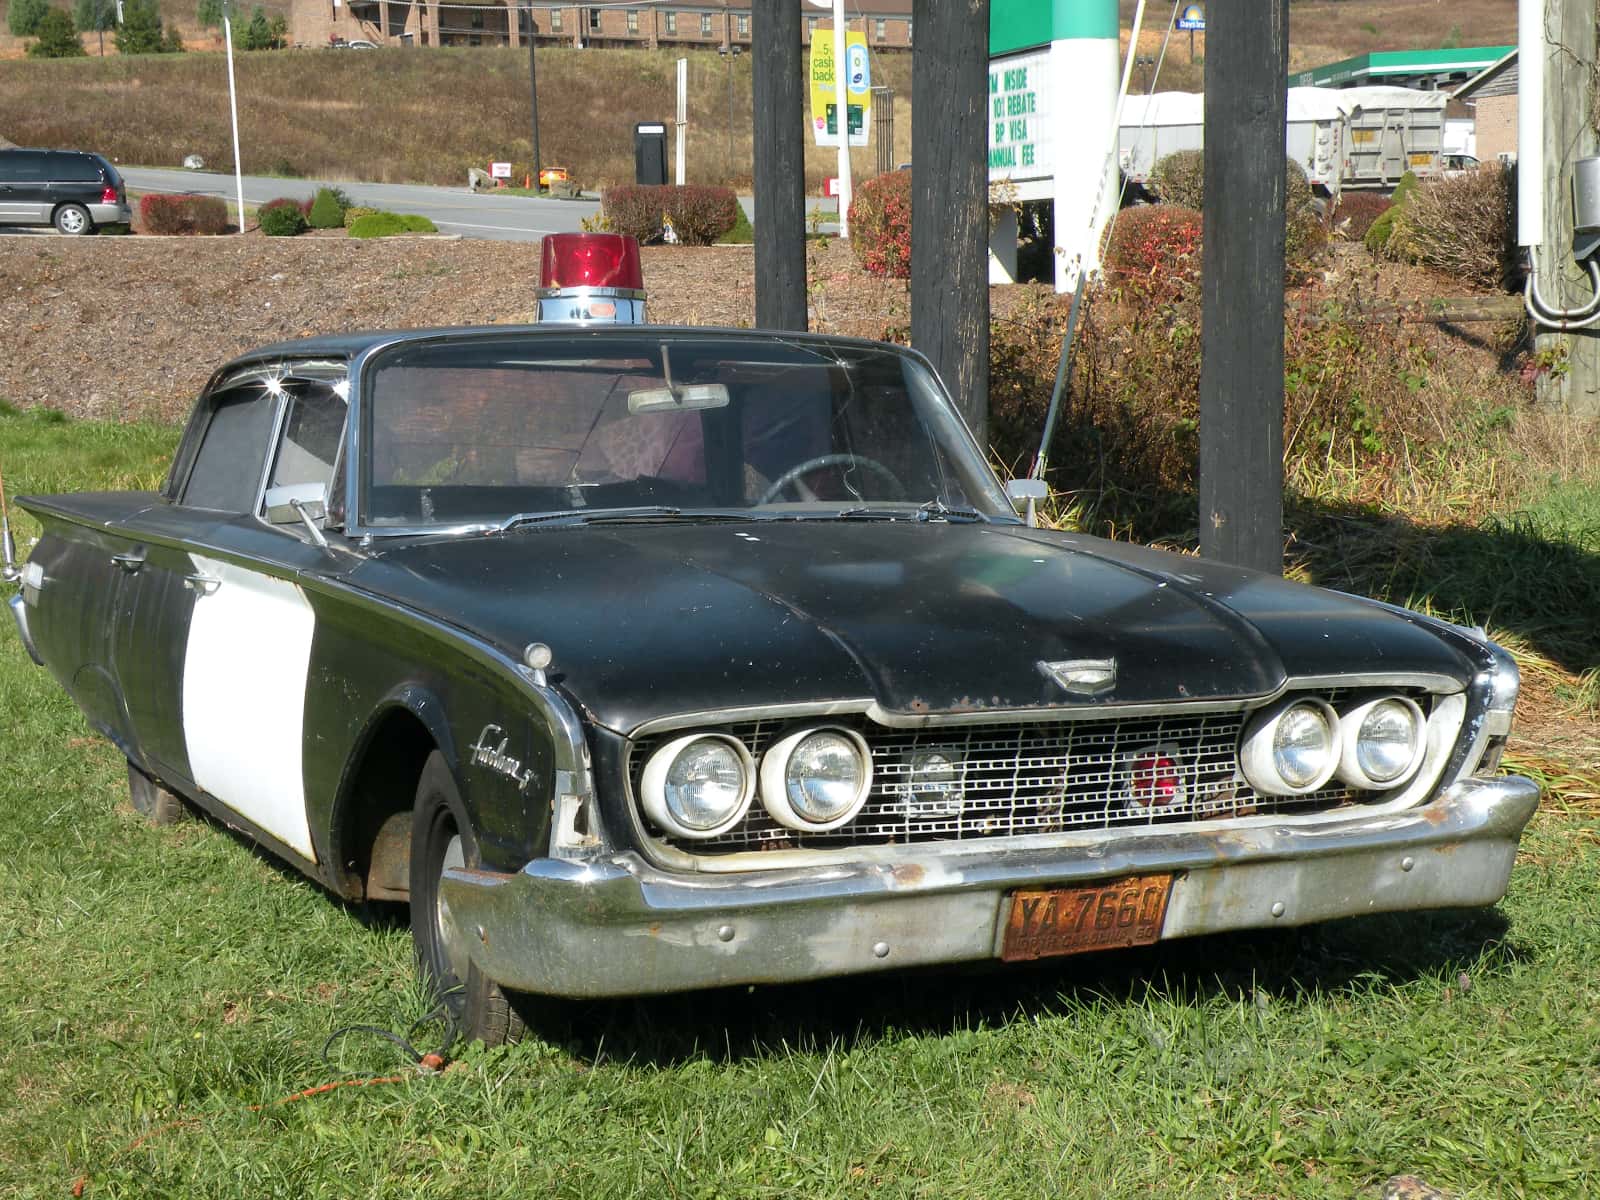 Old black and white police car on grass